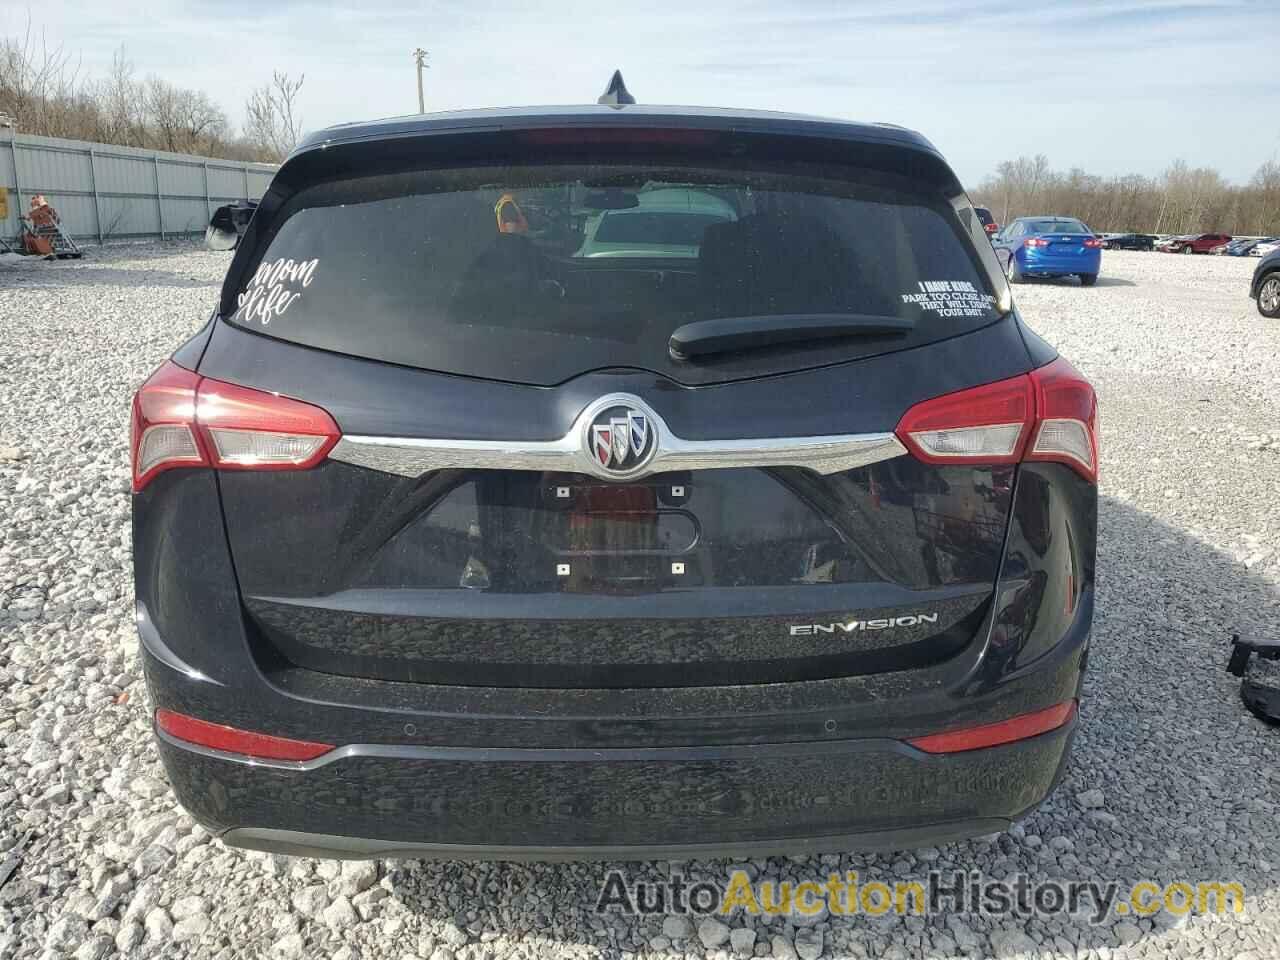 BUICK ENVISION PREFERRED, LRBFXBSA8LD108448